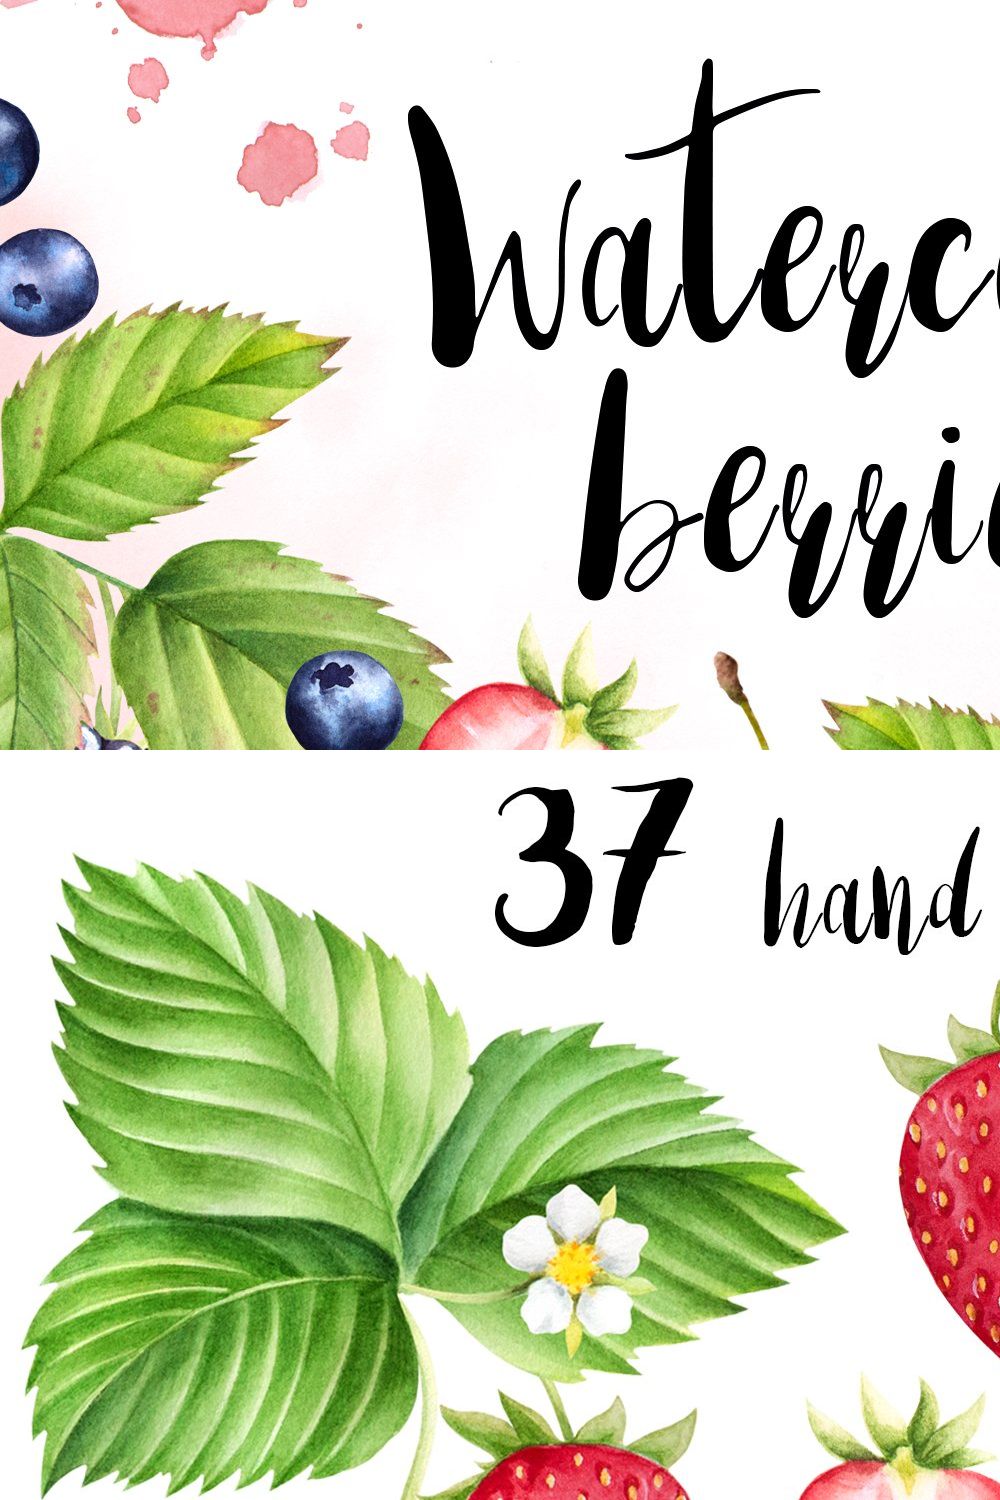 Watercolor berries collection pinterest preview image.